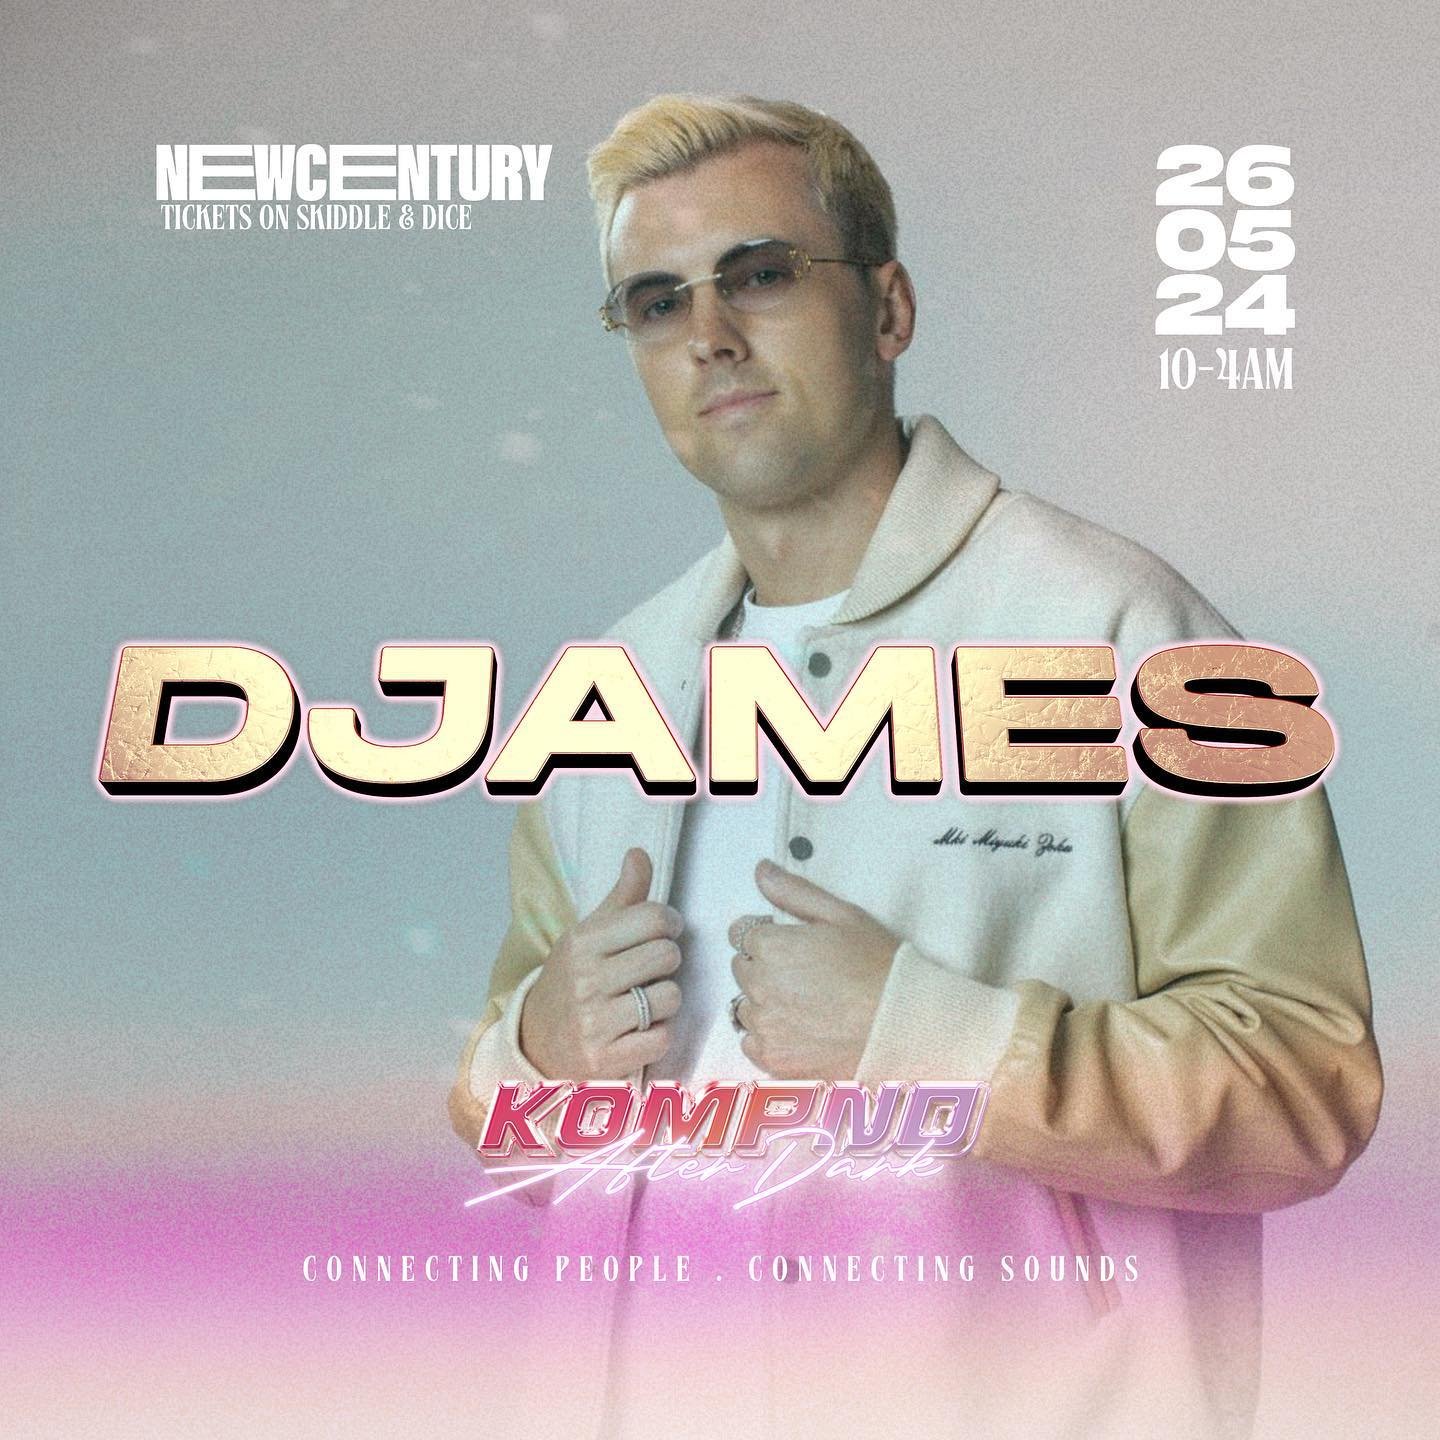 A man that needs no introduction in the 🌍 of Afrobeats! 

Joining us Sunday 26th May for our upcoming show at New Century Hall! The current @redbull3style UK Champion DJAMES will be in the mix alongside a host of top tier UK selectors. 

While his s